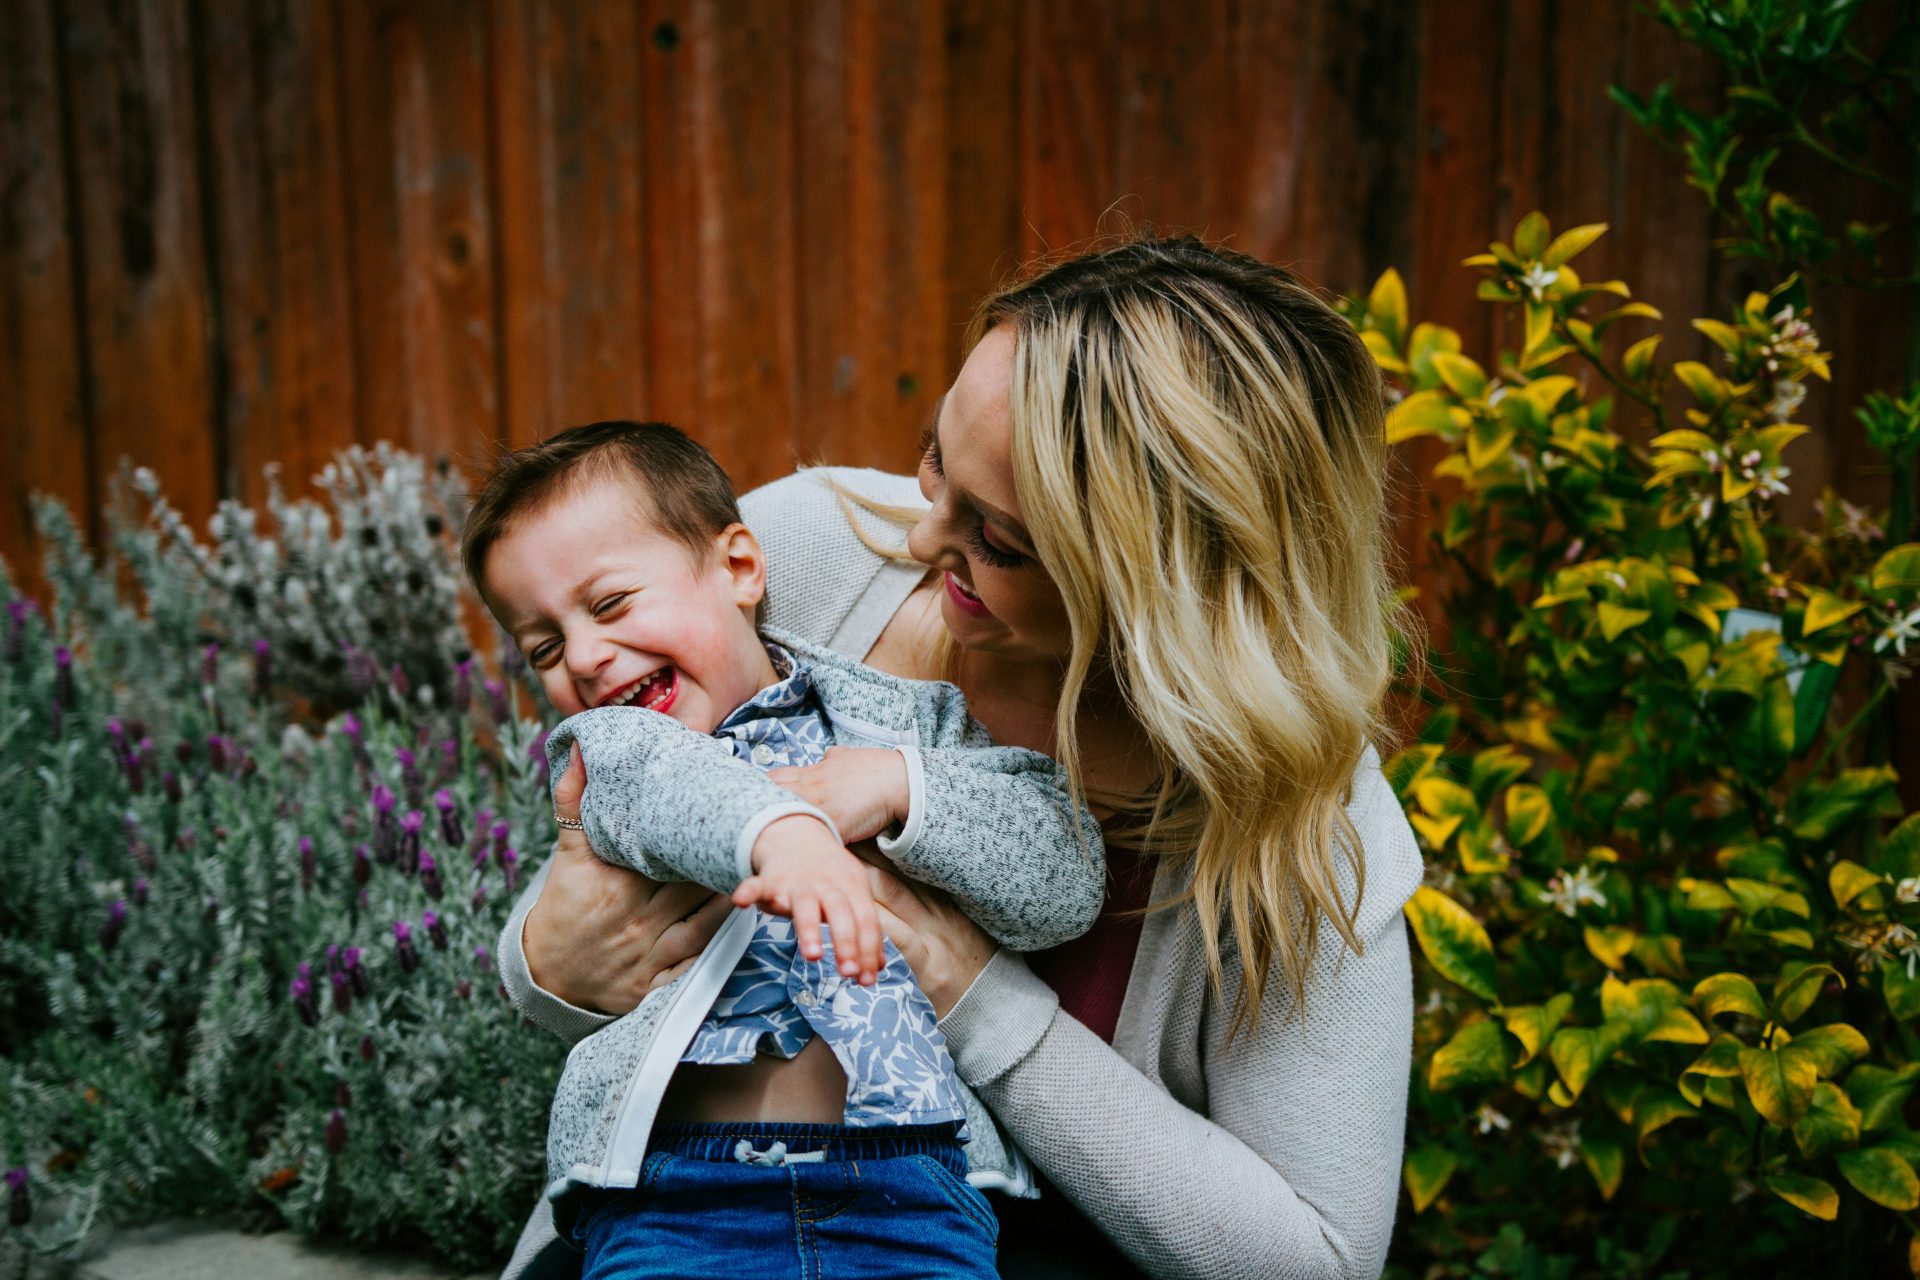 The “relief” for caregiver mothers?  Take care of yourself